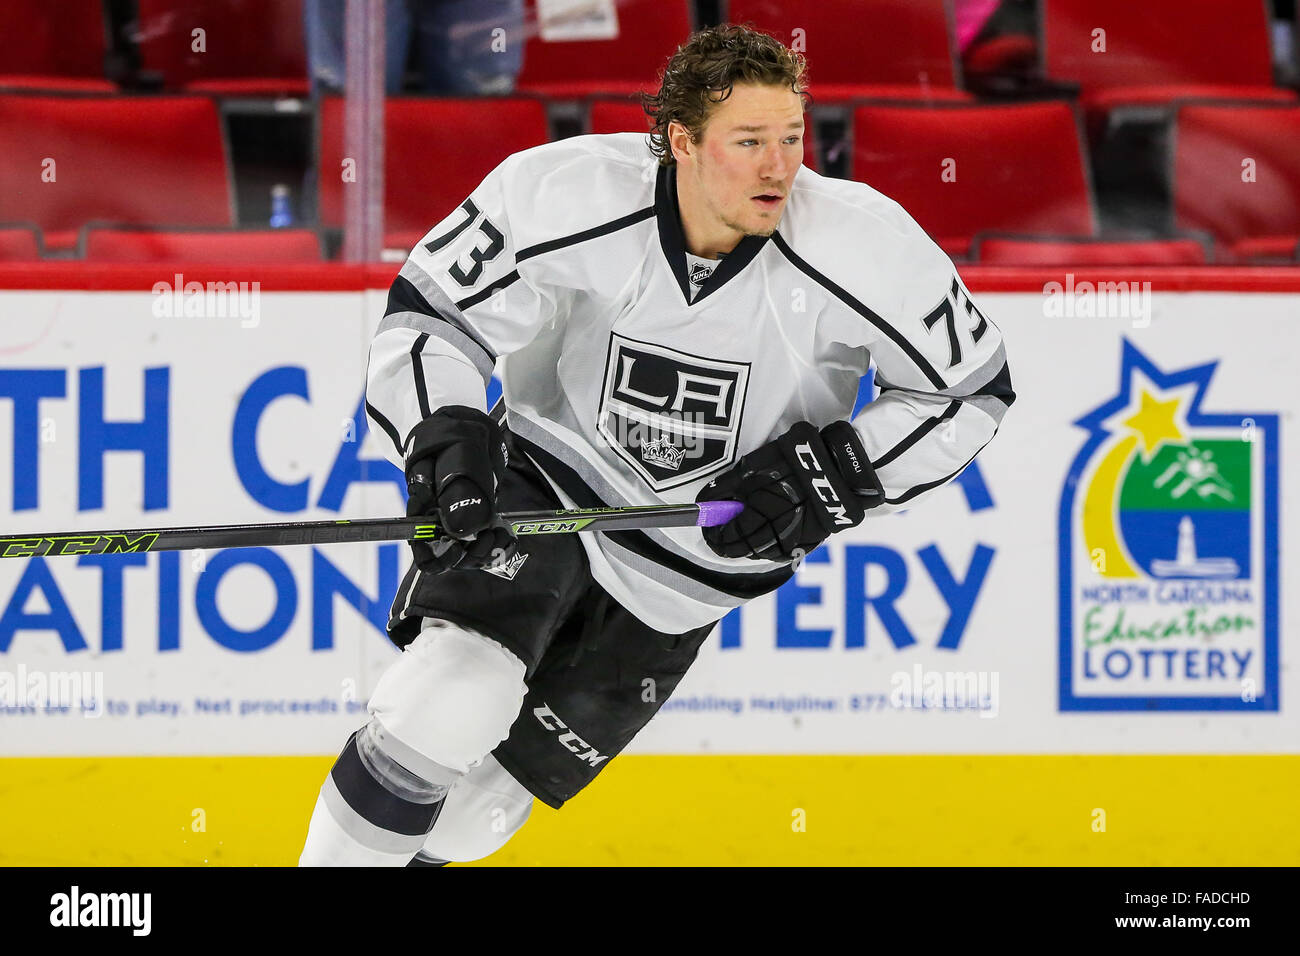 Toffoli Excited for Dodgers Night as LA Kings Host Arizona Coyotes